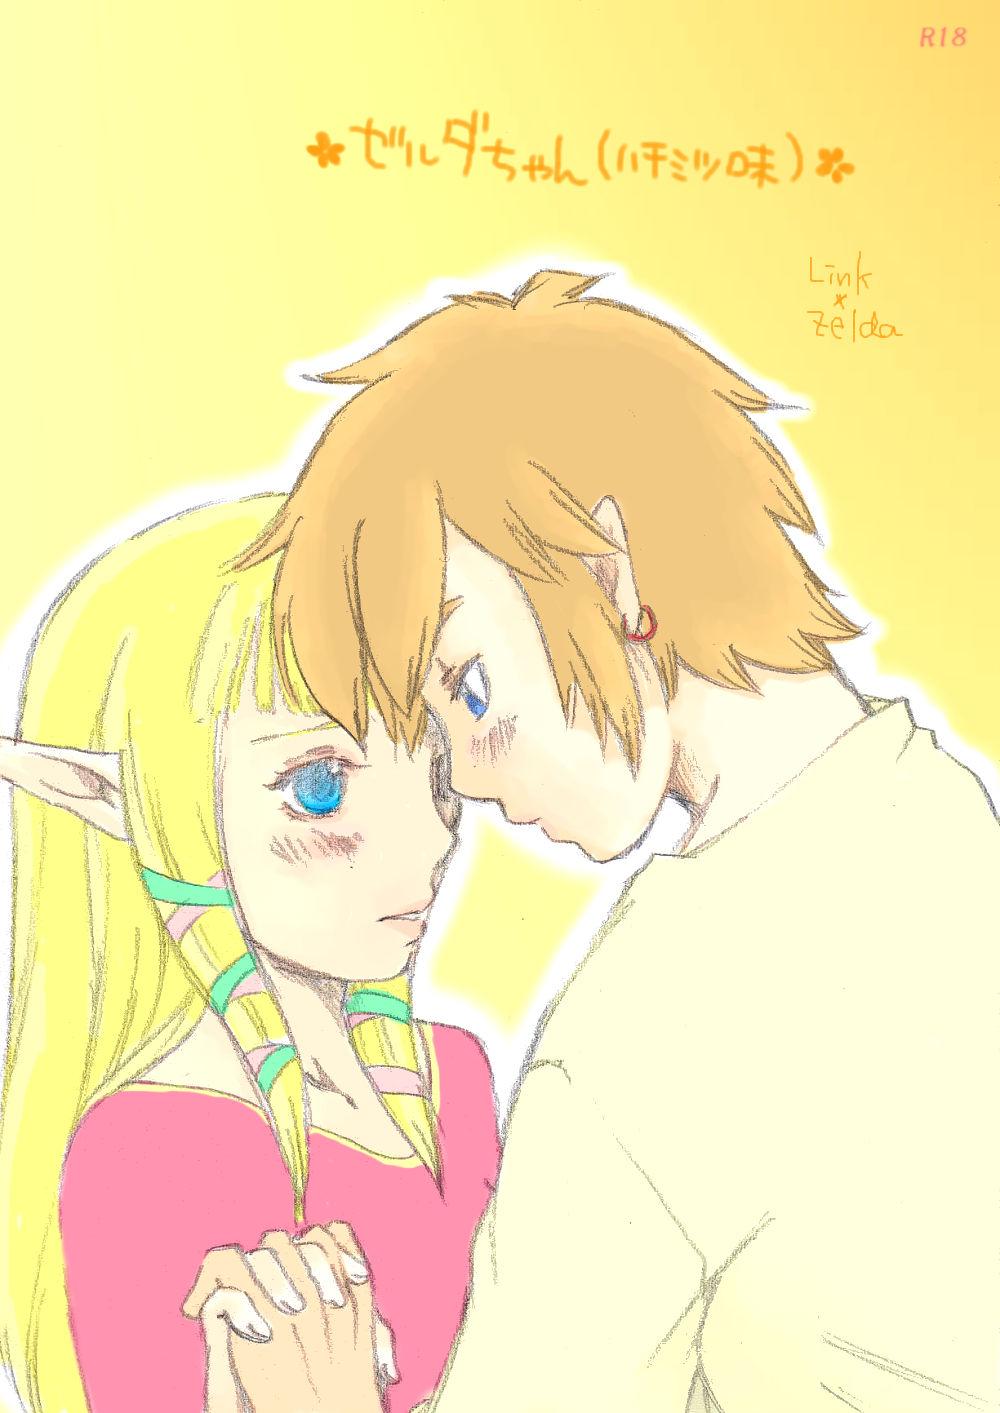 And [Buthi] ✿ Zelda-chan (Honey flavored) ✿ (The Legend of Zelda: Skyward Sword) [English] - The legend of zelda Panty - Picture 1